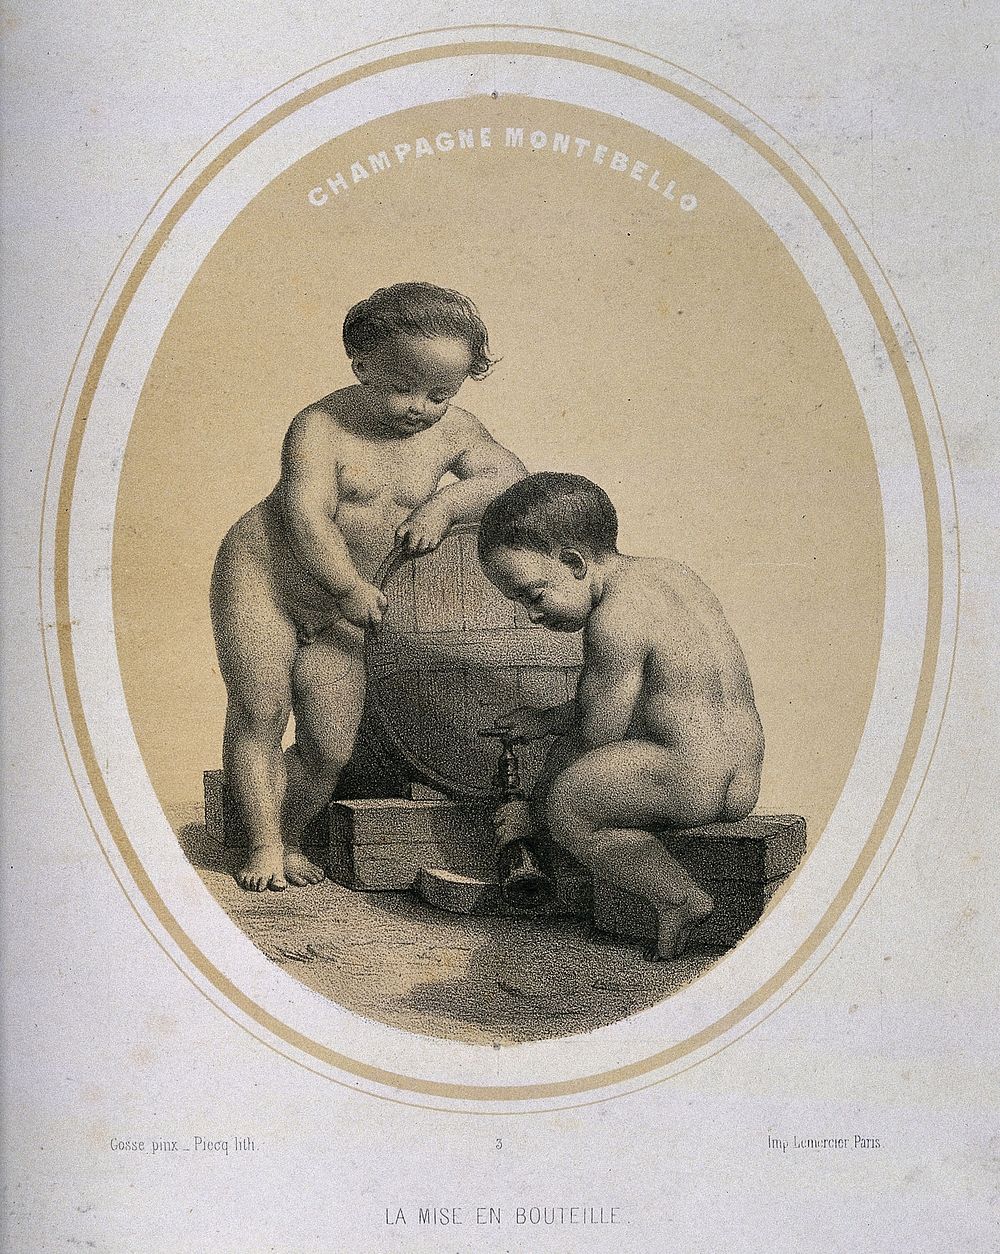 Two naked children bottling champagne. Lithograph by Piecq, c. 1845, after Gosse.